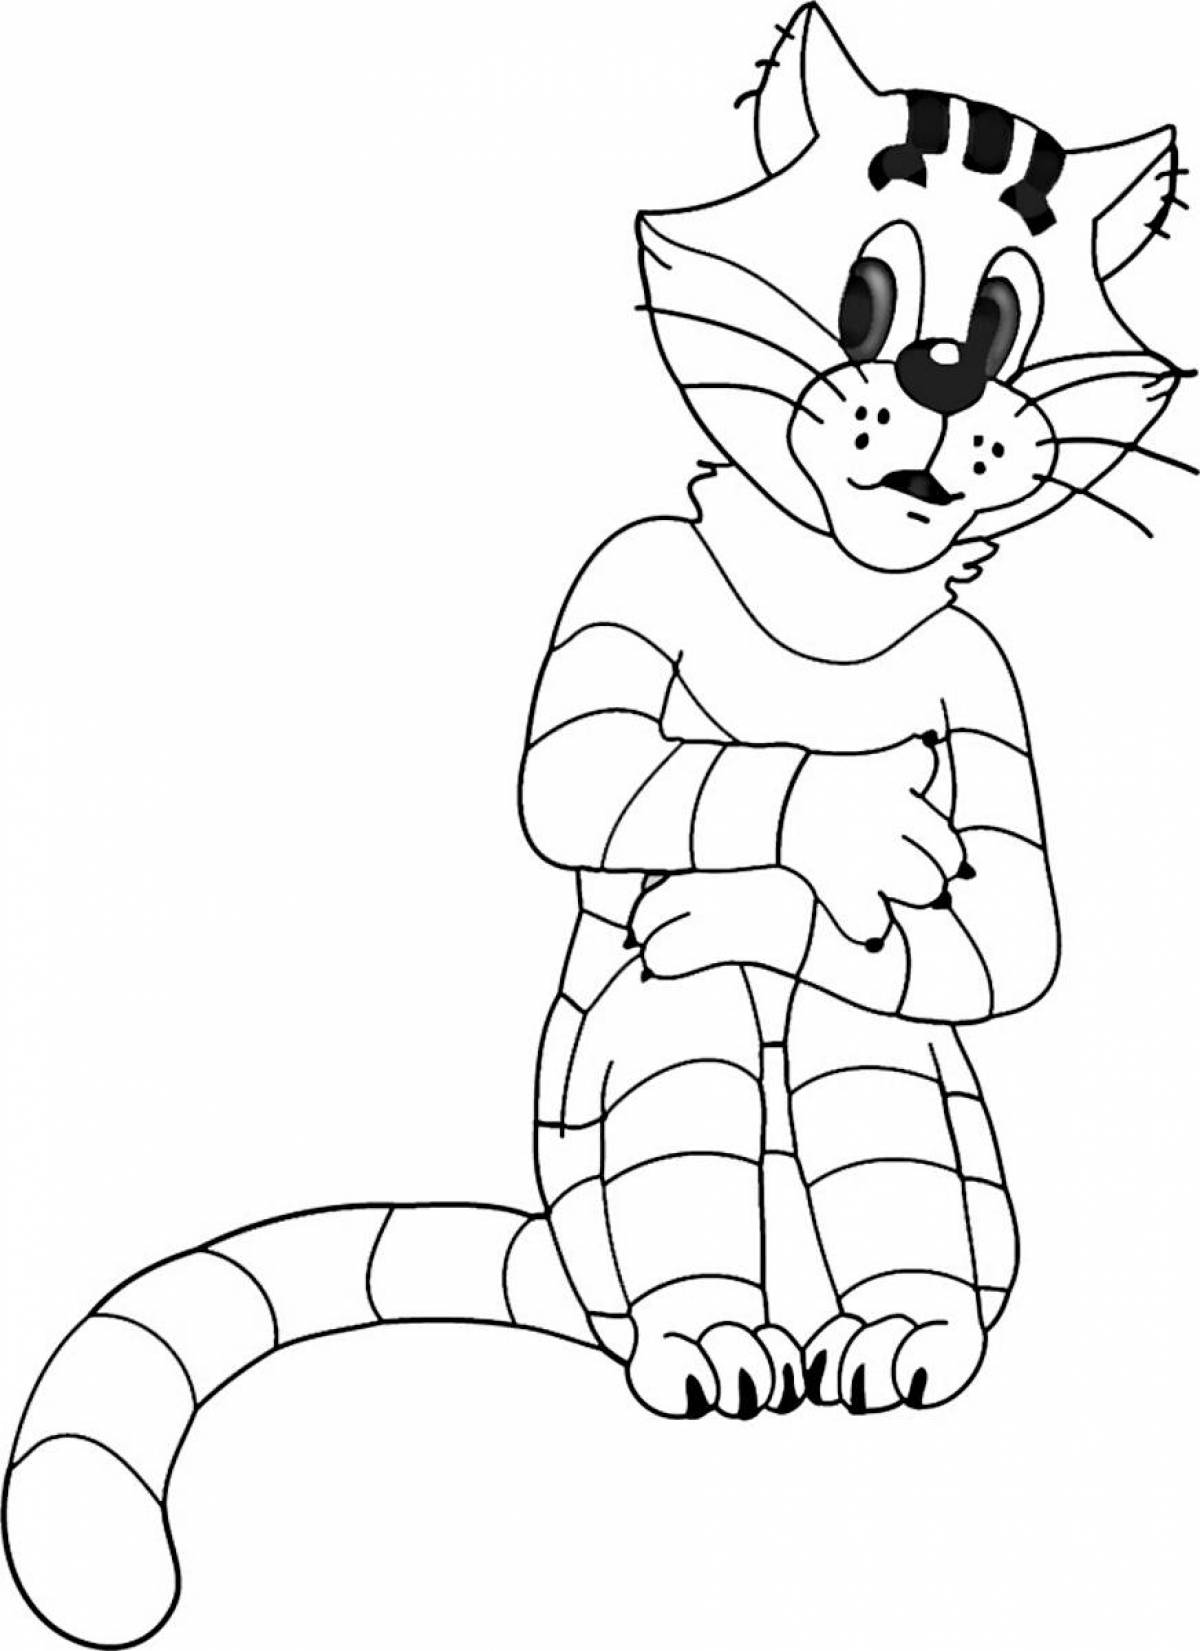 Coloring page dazzling matroskin cat